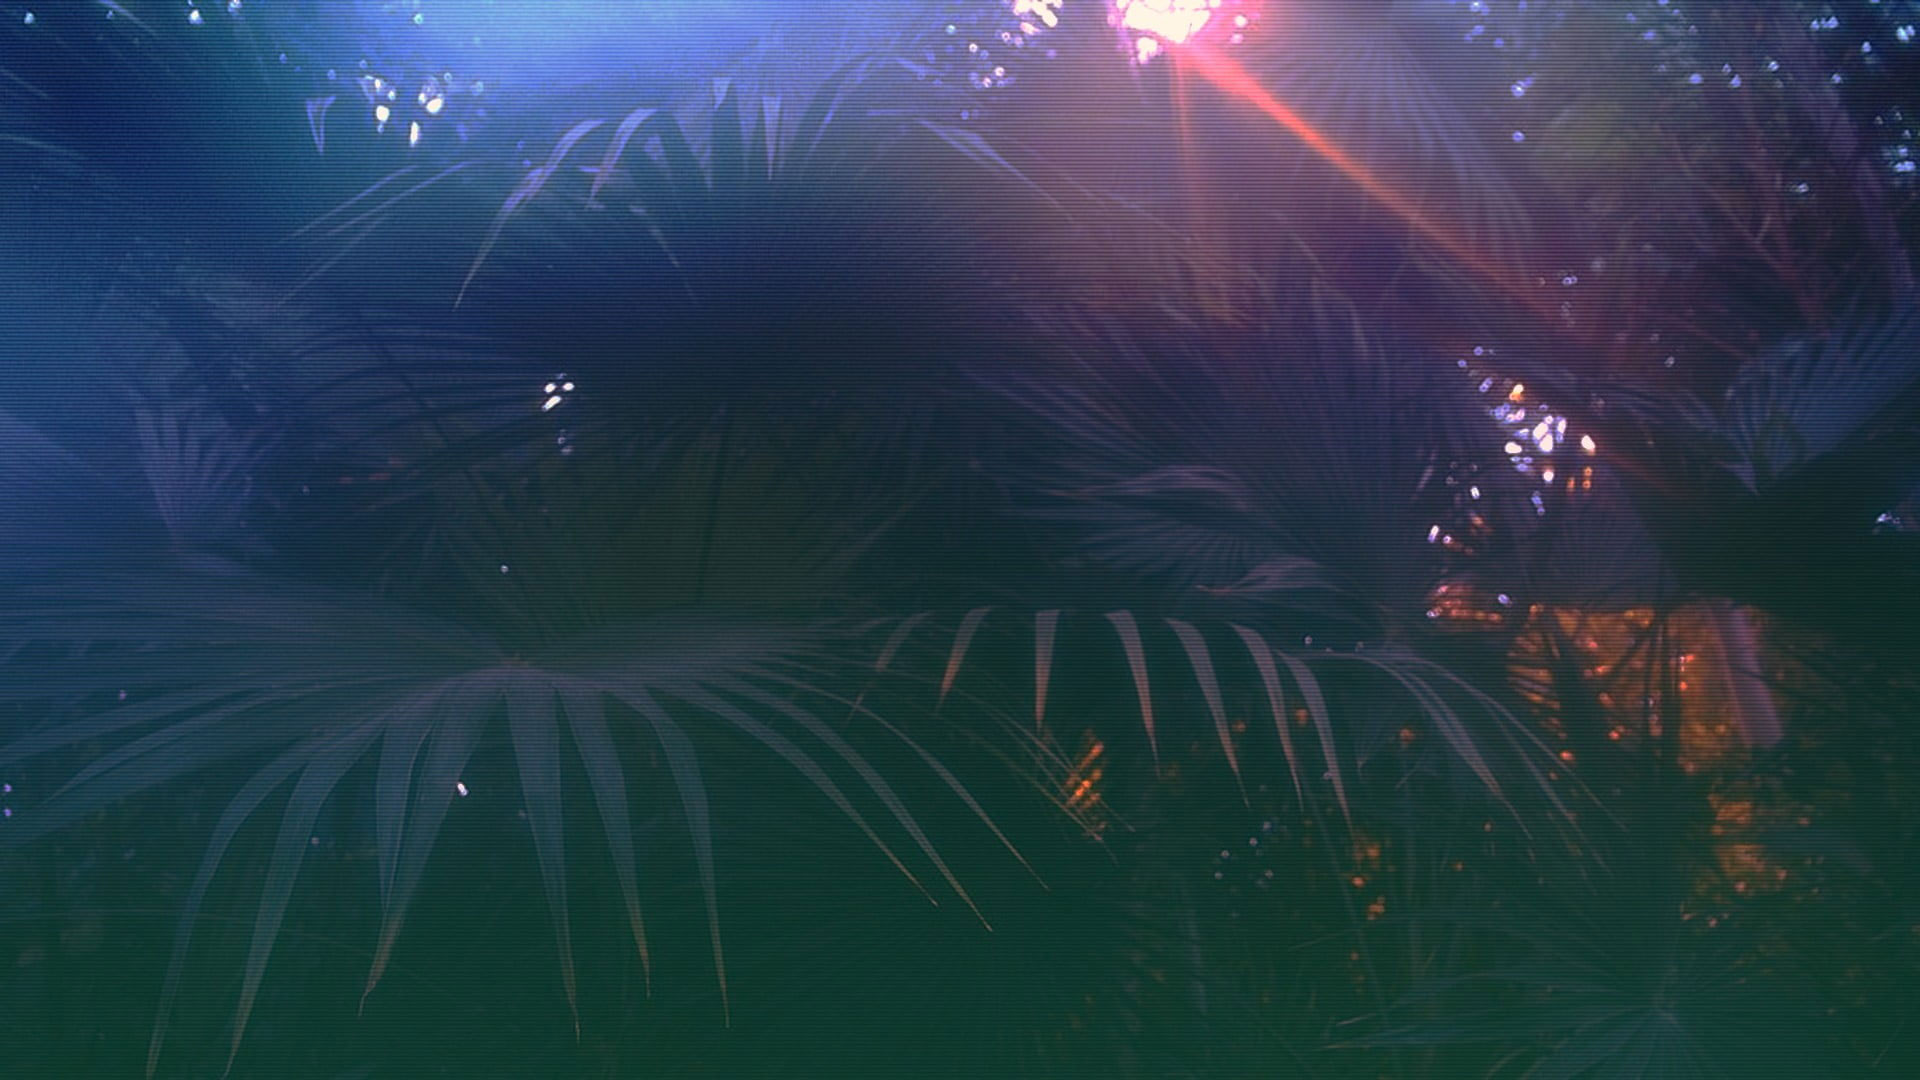 Green palm plant wallpaper, vaporwave, glitch art, growth, tree, beauty in nature